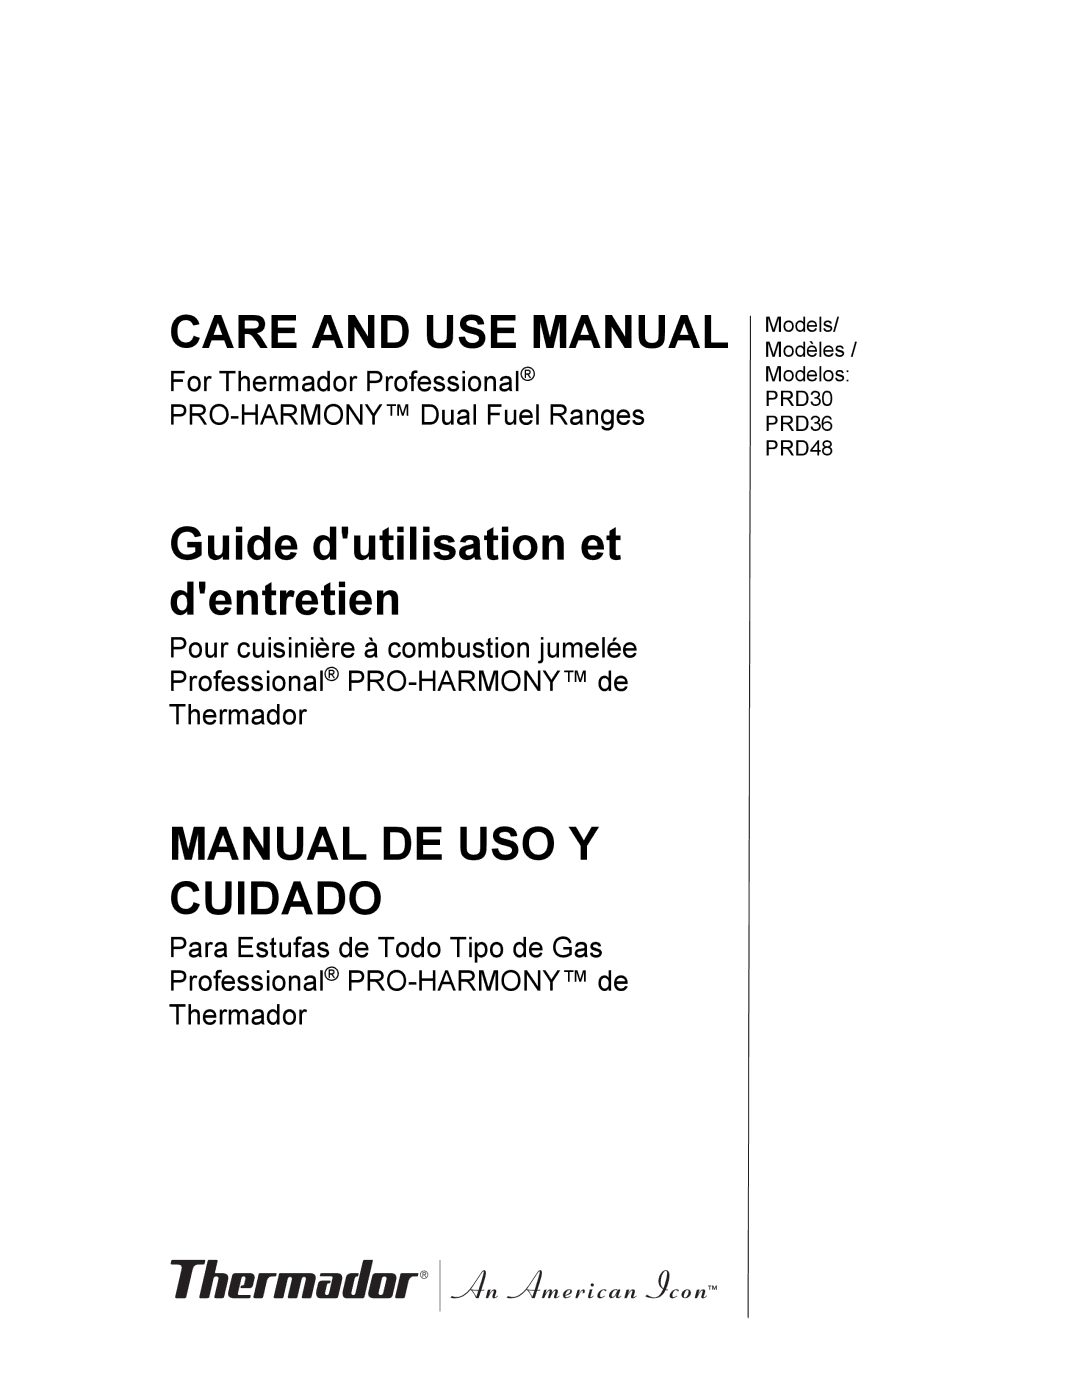 Thermador PRD36, PRD48, PRD30 manual Care and USE Manual 